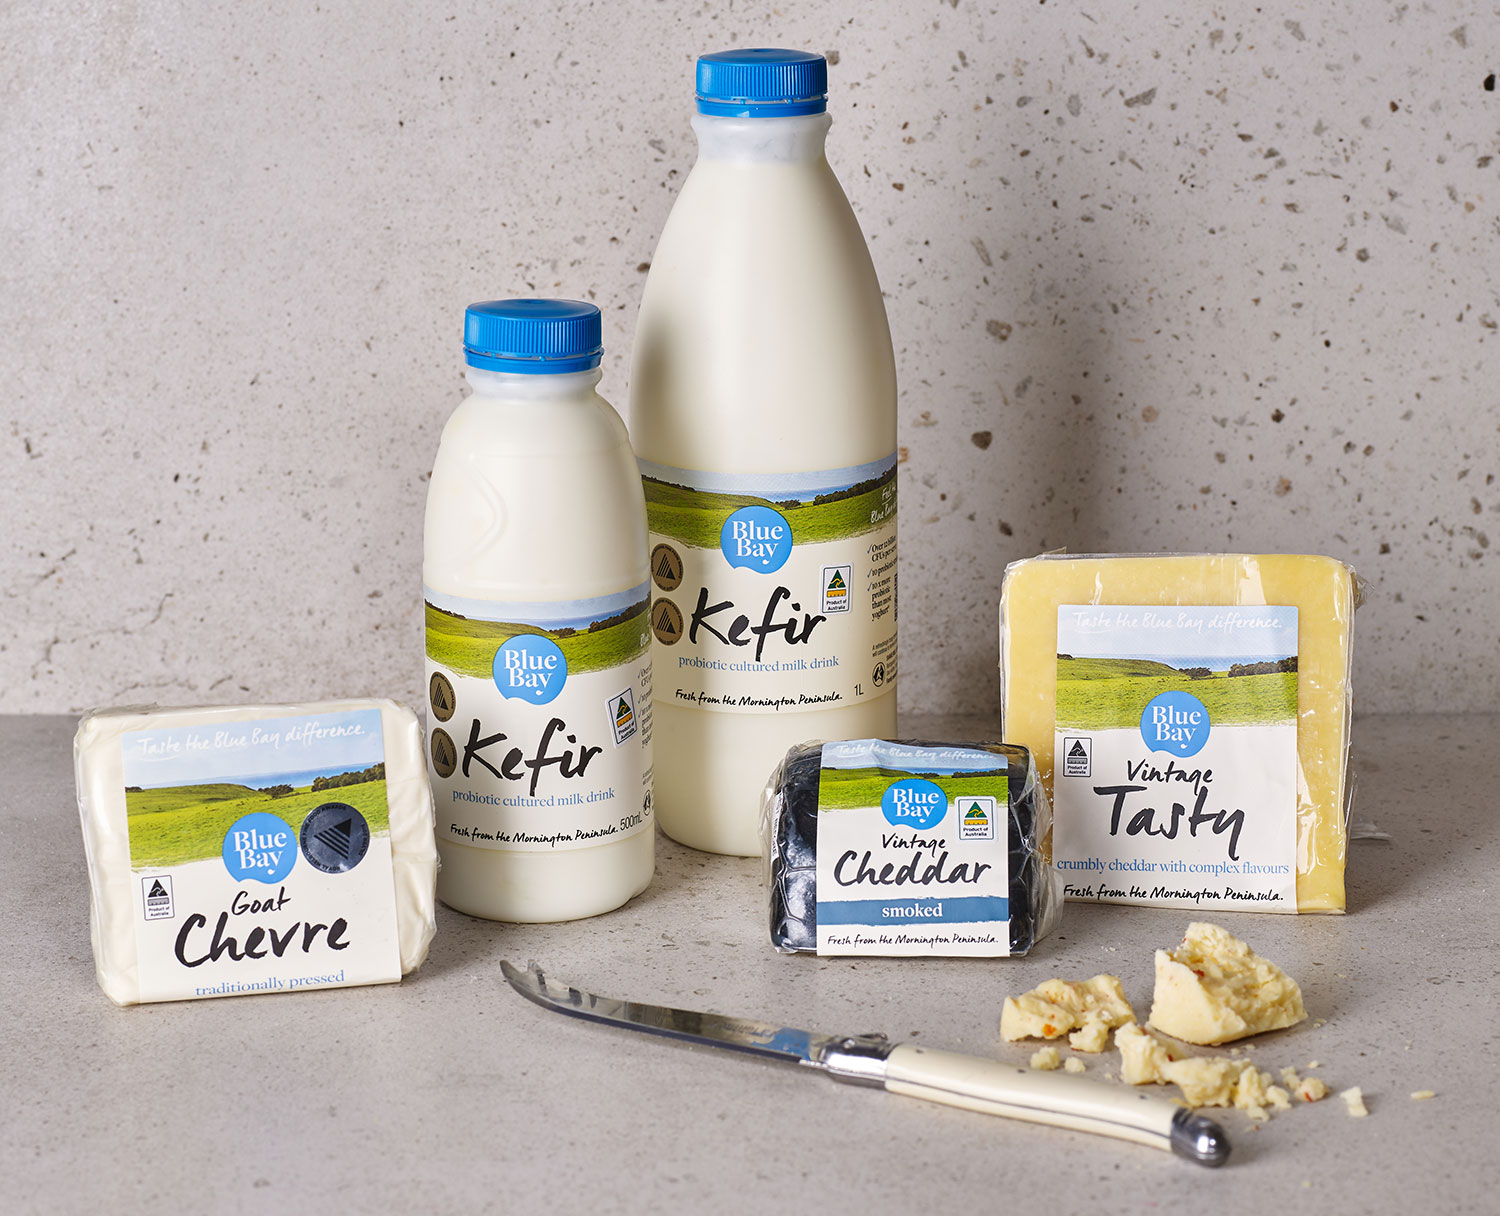 Blue Bay products, from left: Goat Chevre, Cow’s Milk Kefir, Vintage Cheddar, Vintage Tasty Cheese